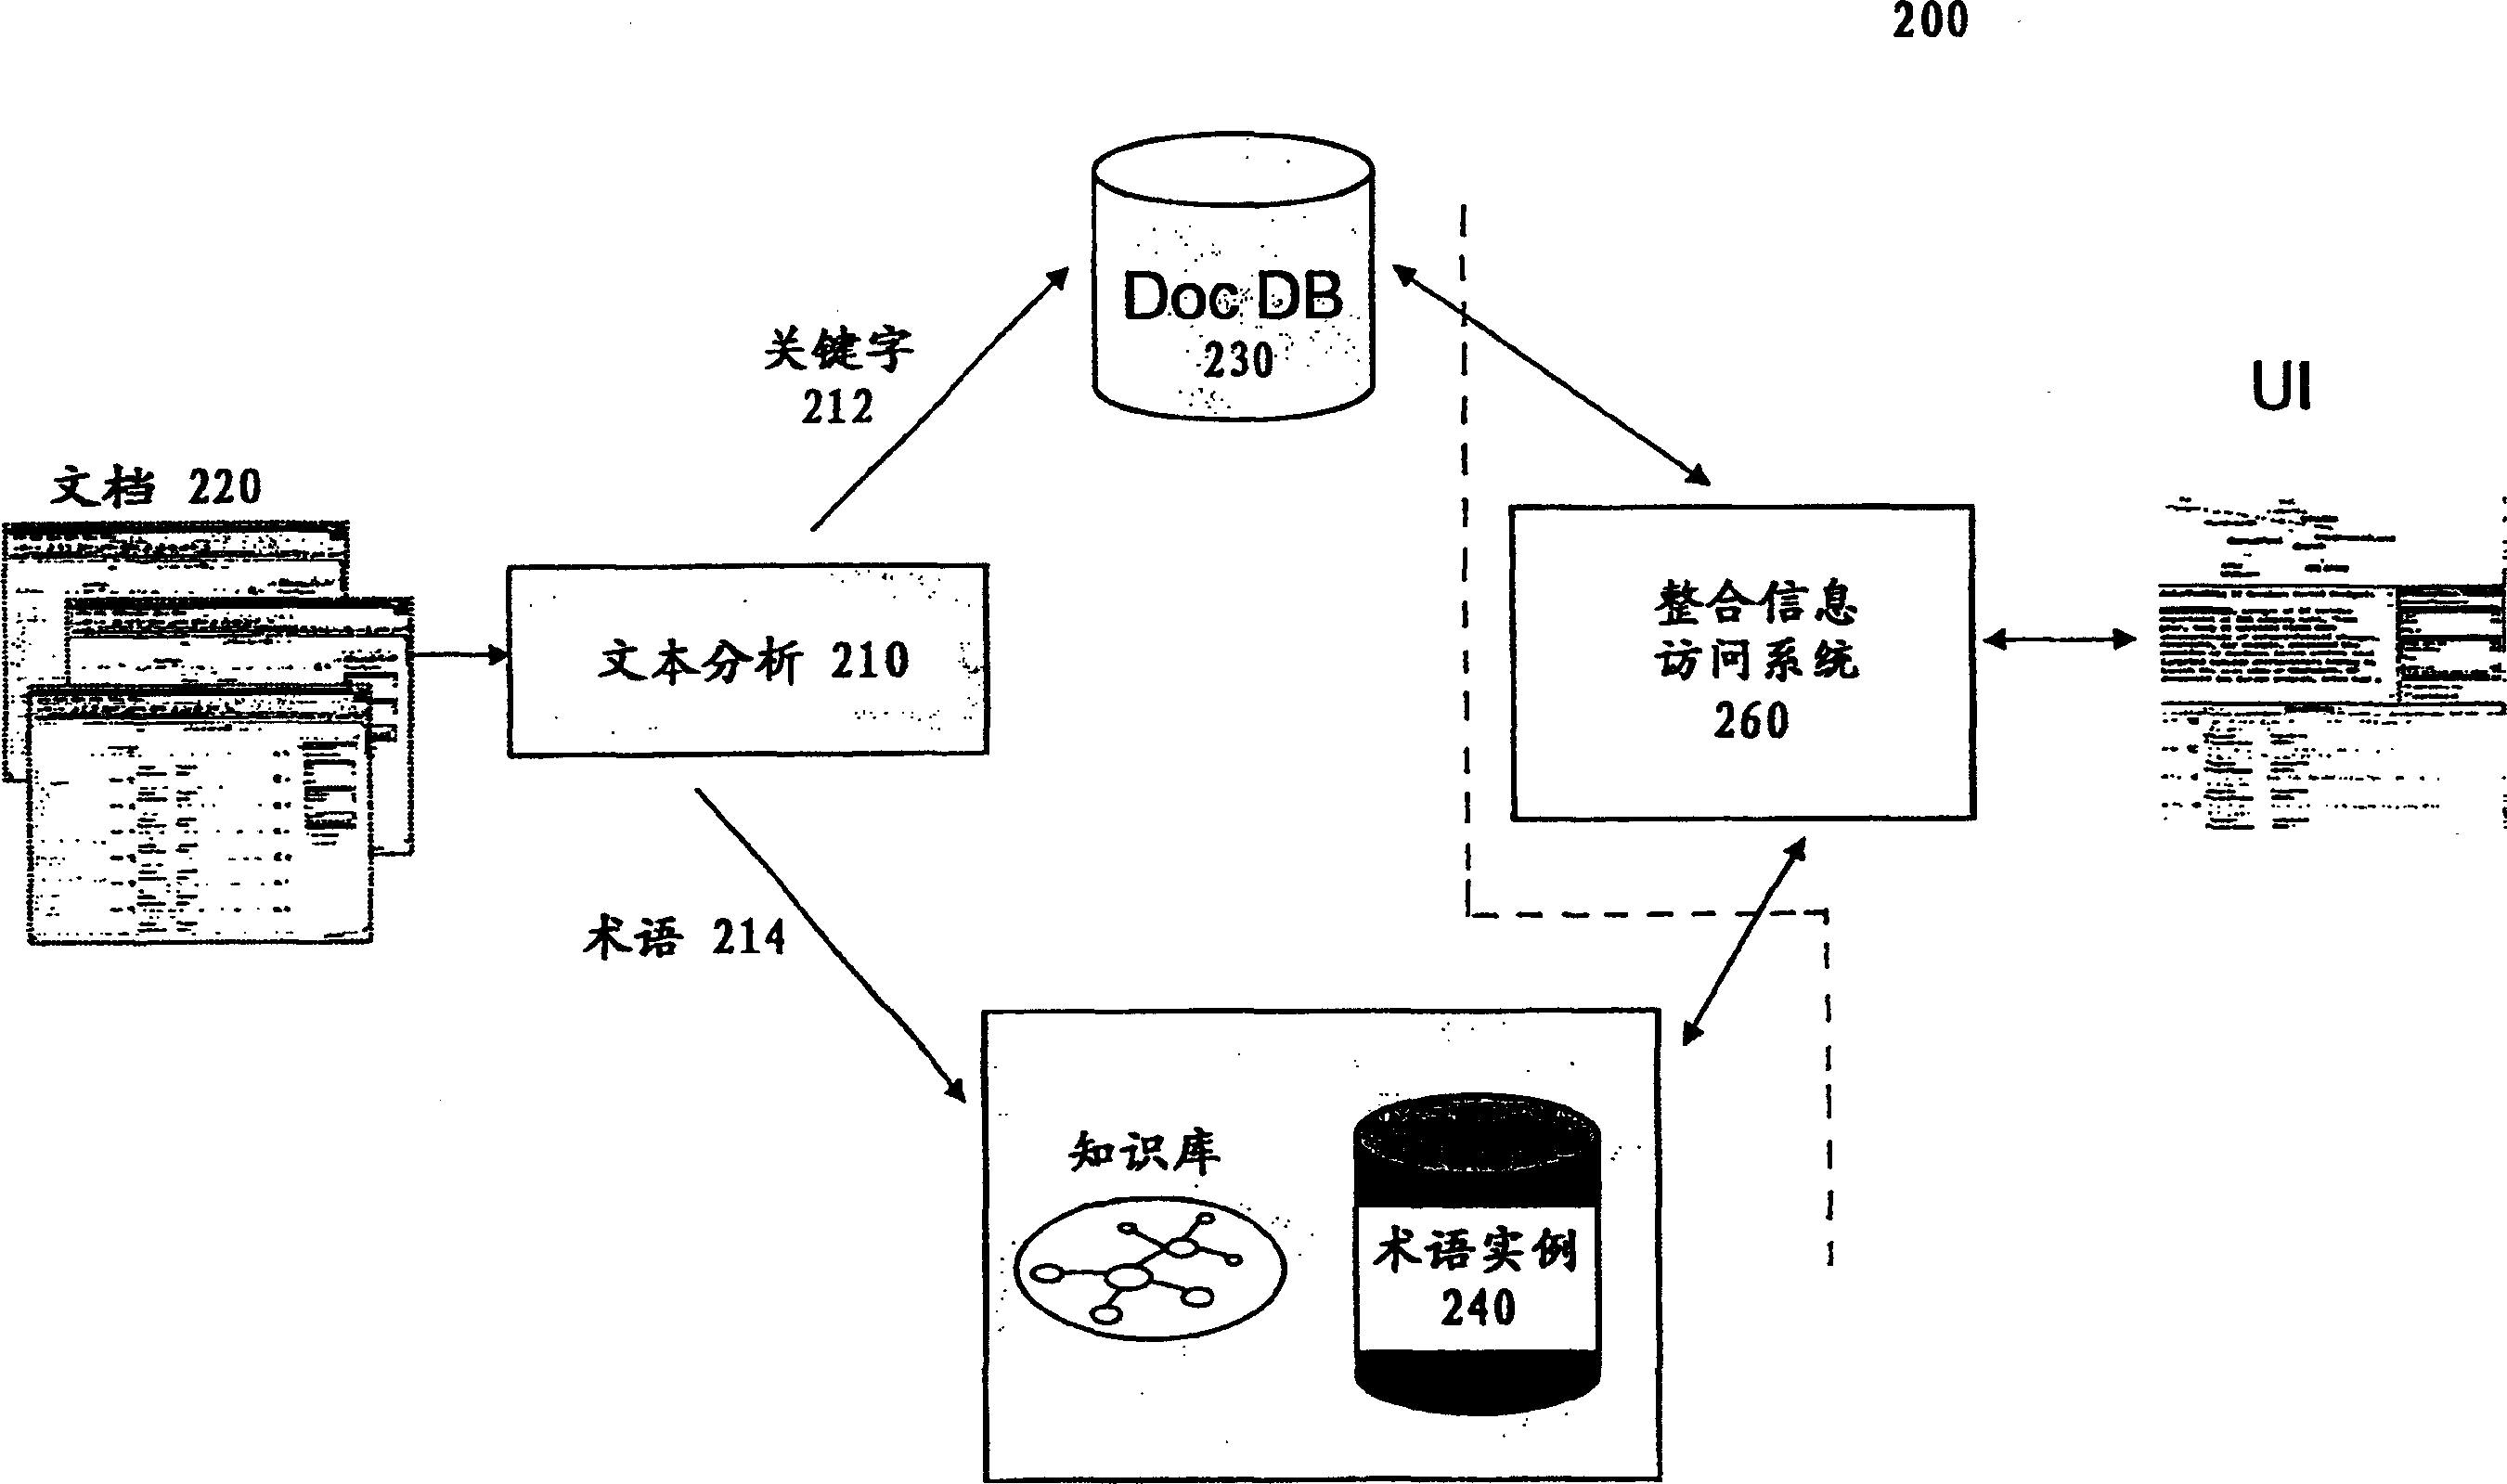 Interacting viewing system and method